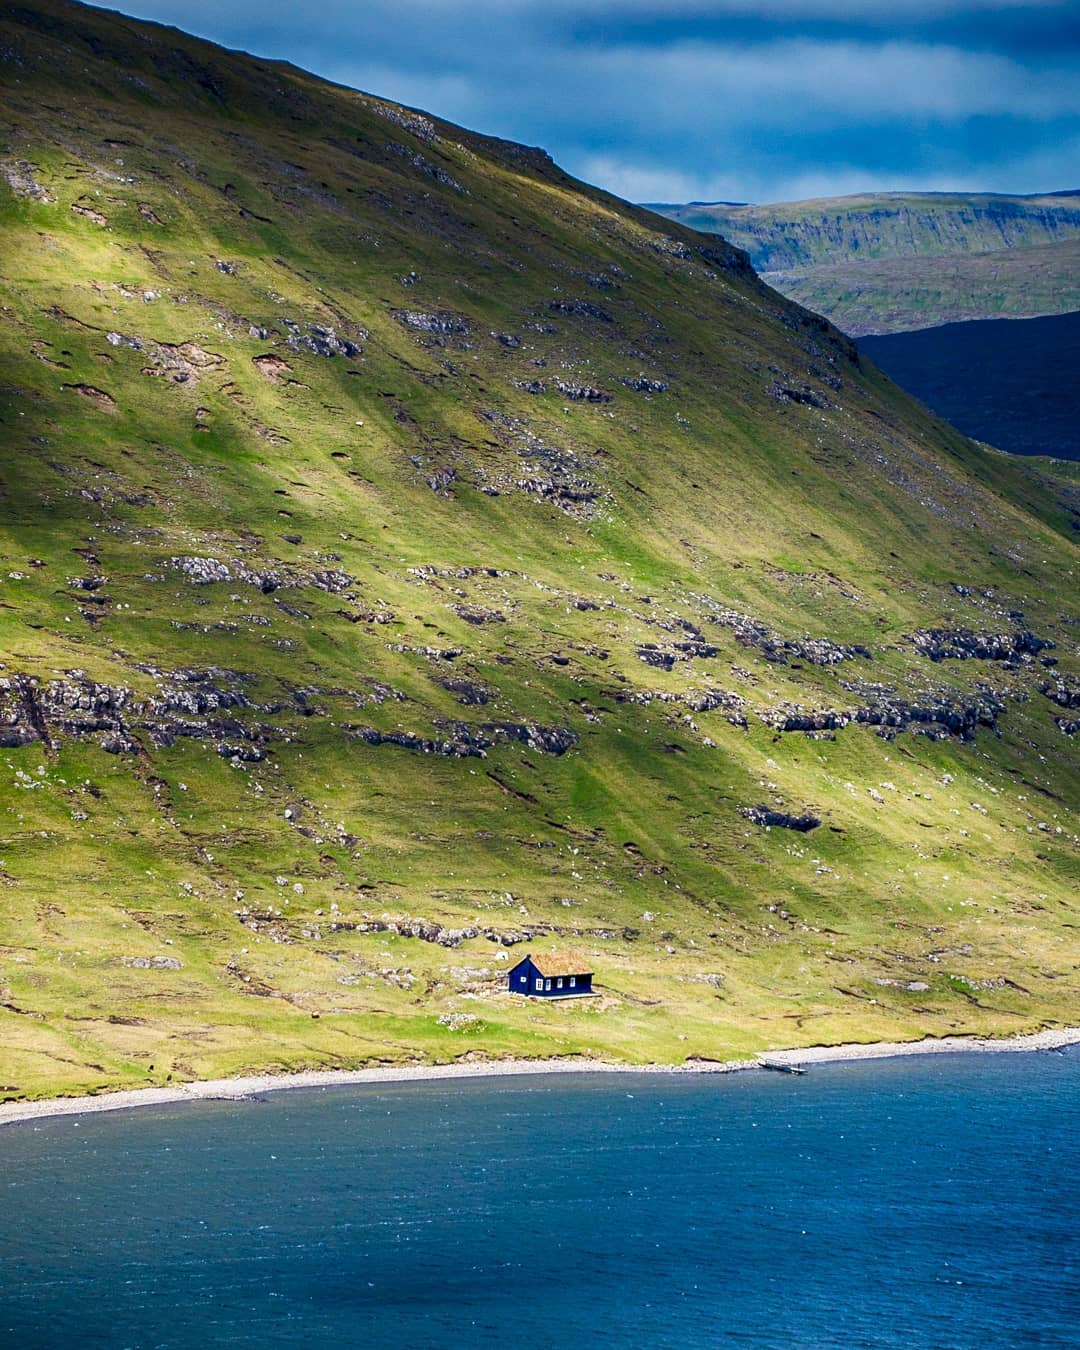 A lonely dwelling by the shores of Sørvágsvatn Lake – where the largest lake in the Faroe Islands stretches into ocean.⠀
⠀
We sent a day hiking one of the most popular hikes in the Faroes along the shores of Lake Sørvágsvatn to the viewpoints at #Trælanípa and #Bøsdalafossur waterfall. The trail skirts the lake, which is the largest in the Faroe Islands, before branching off up the Trælanípa escarpment.⠀
⠀
Trælanípa (Slave Cliff) supposedly got its name from when Vikings pushed their unwanted slaves into the ocean.⠀
⠀
We visited the Faroe Islands with support from @visitfaroeislands.⠀⠀⠀⠀
-⠀⠀⠀⠀
-⠀⠀⠀⠀
-⠀⠀⠀⠀
-⠀⠀⠀⠀
-⠀⠀⠀⠀
-⠀⠀
#Sørvágsvatn #SørvágsvatnLake #LakeSørvágsvatn #visitfaroeislands #atlanticairways #faroes #faroe #lonelyplanet #lppathfinders #rgphoto